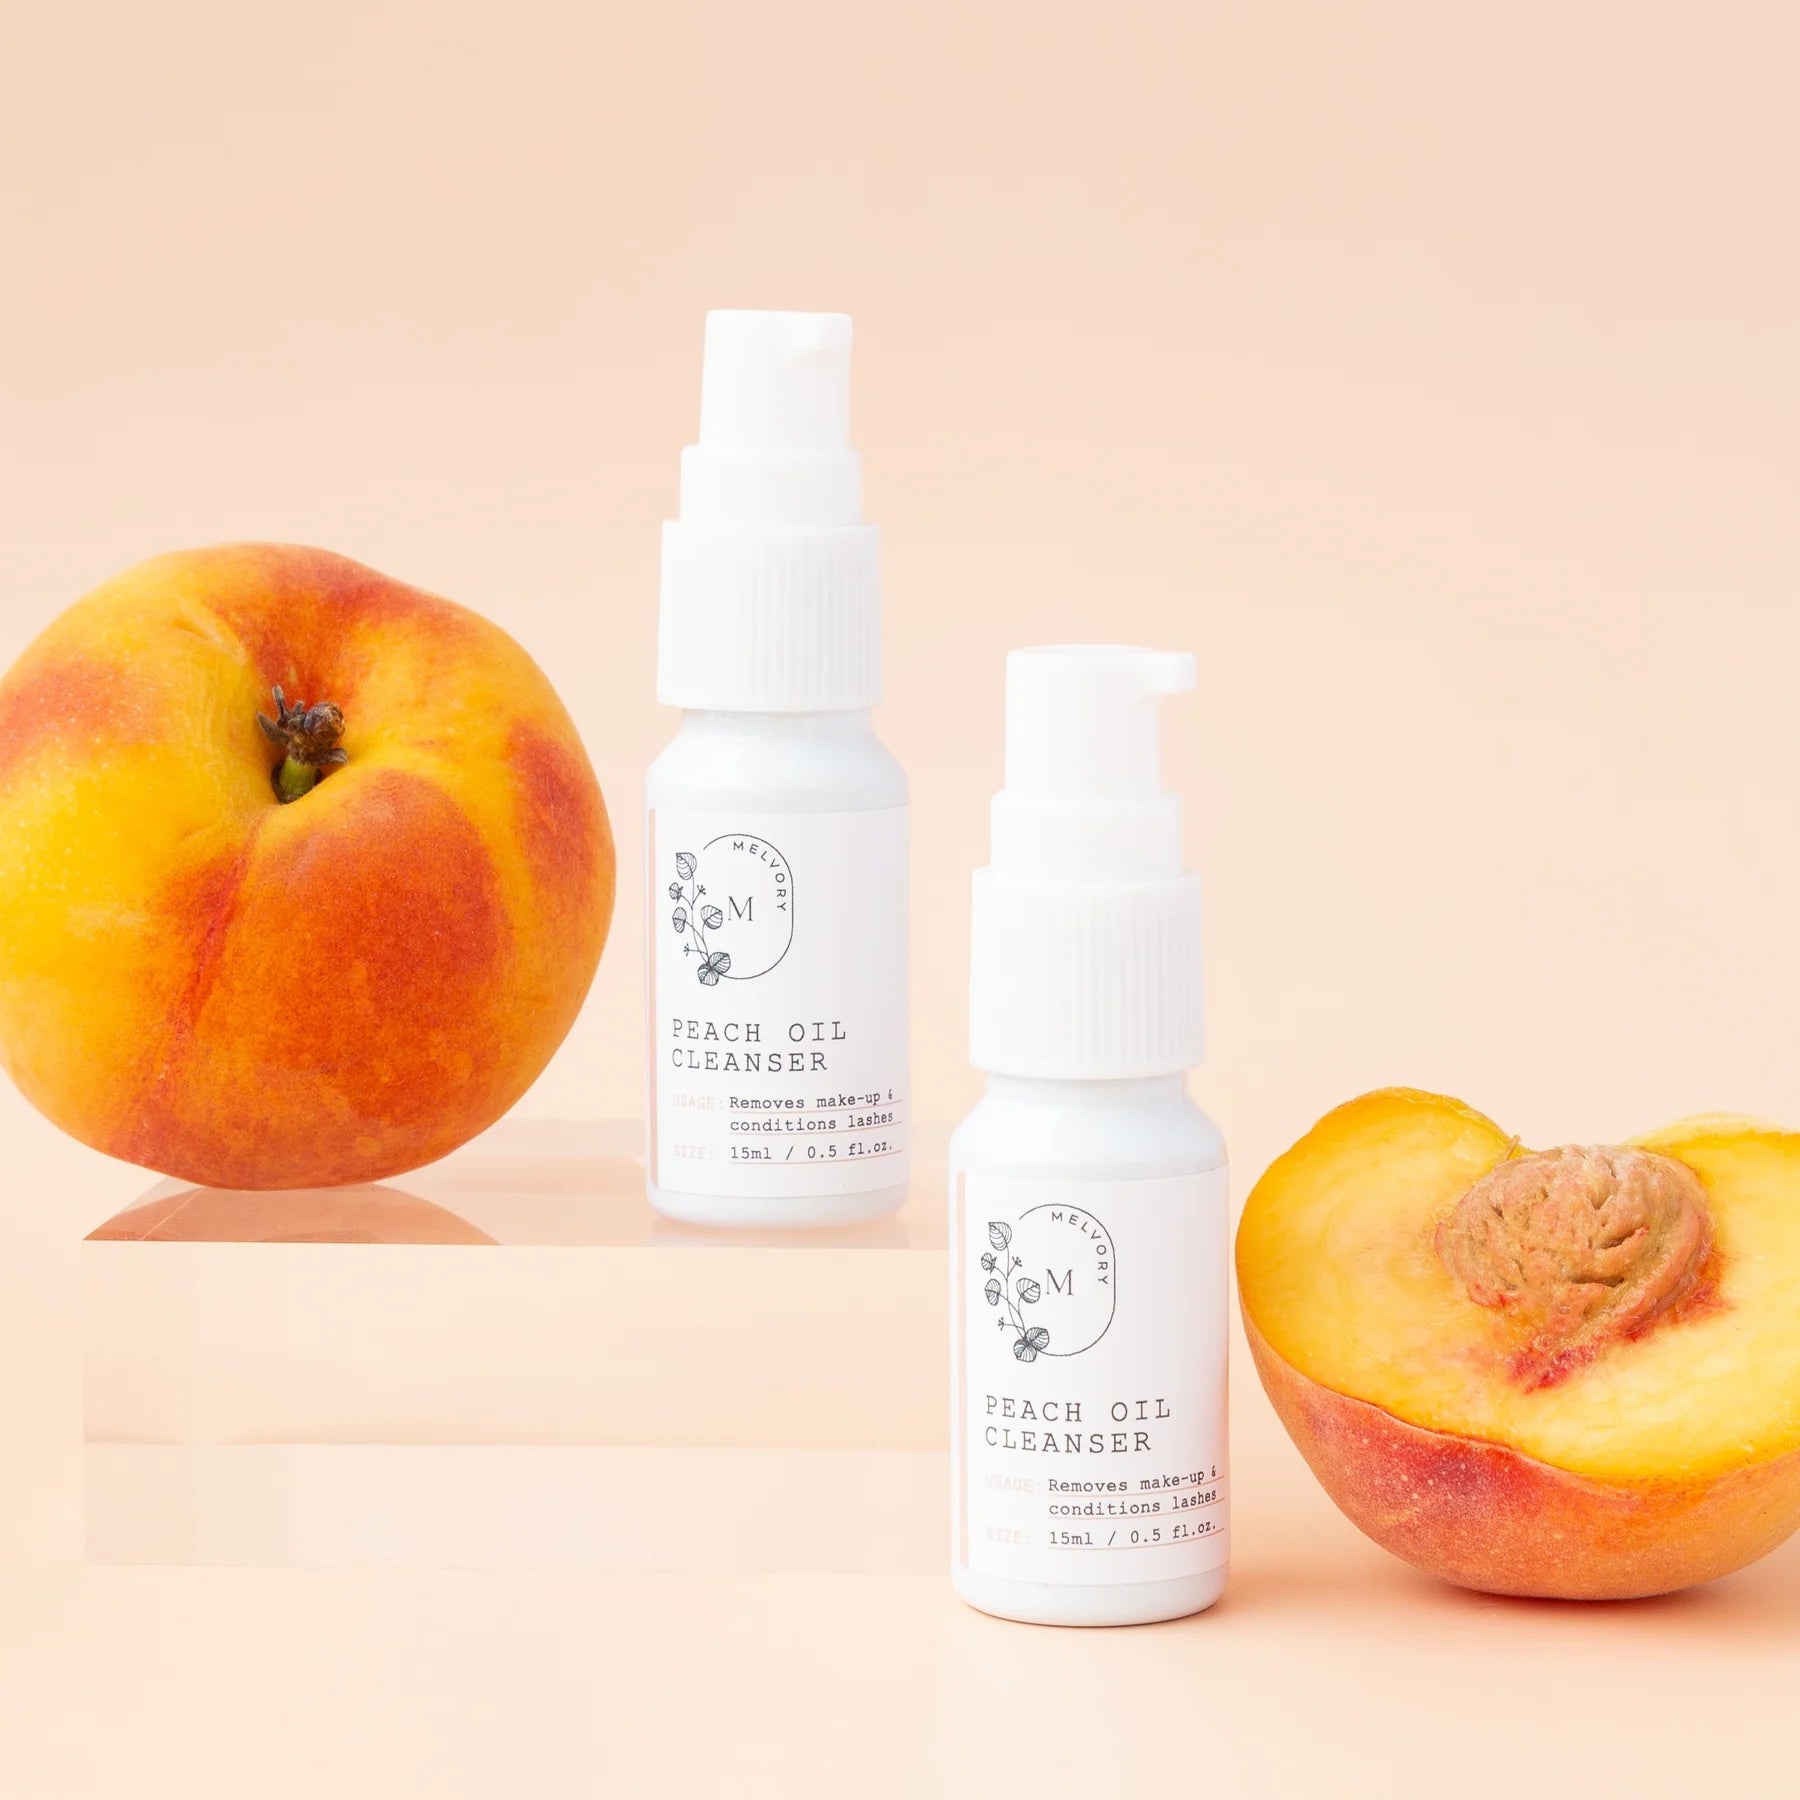 ** Preorder ONLY** Peach Oil Cleanser